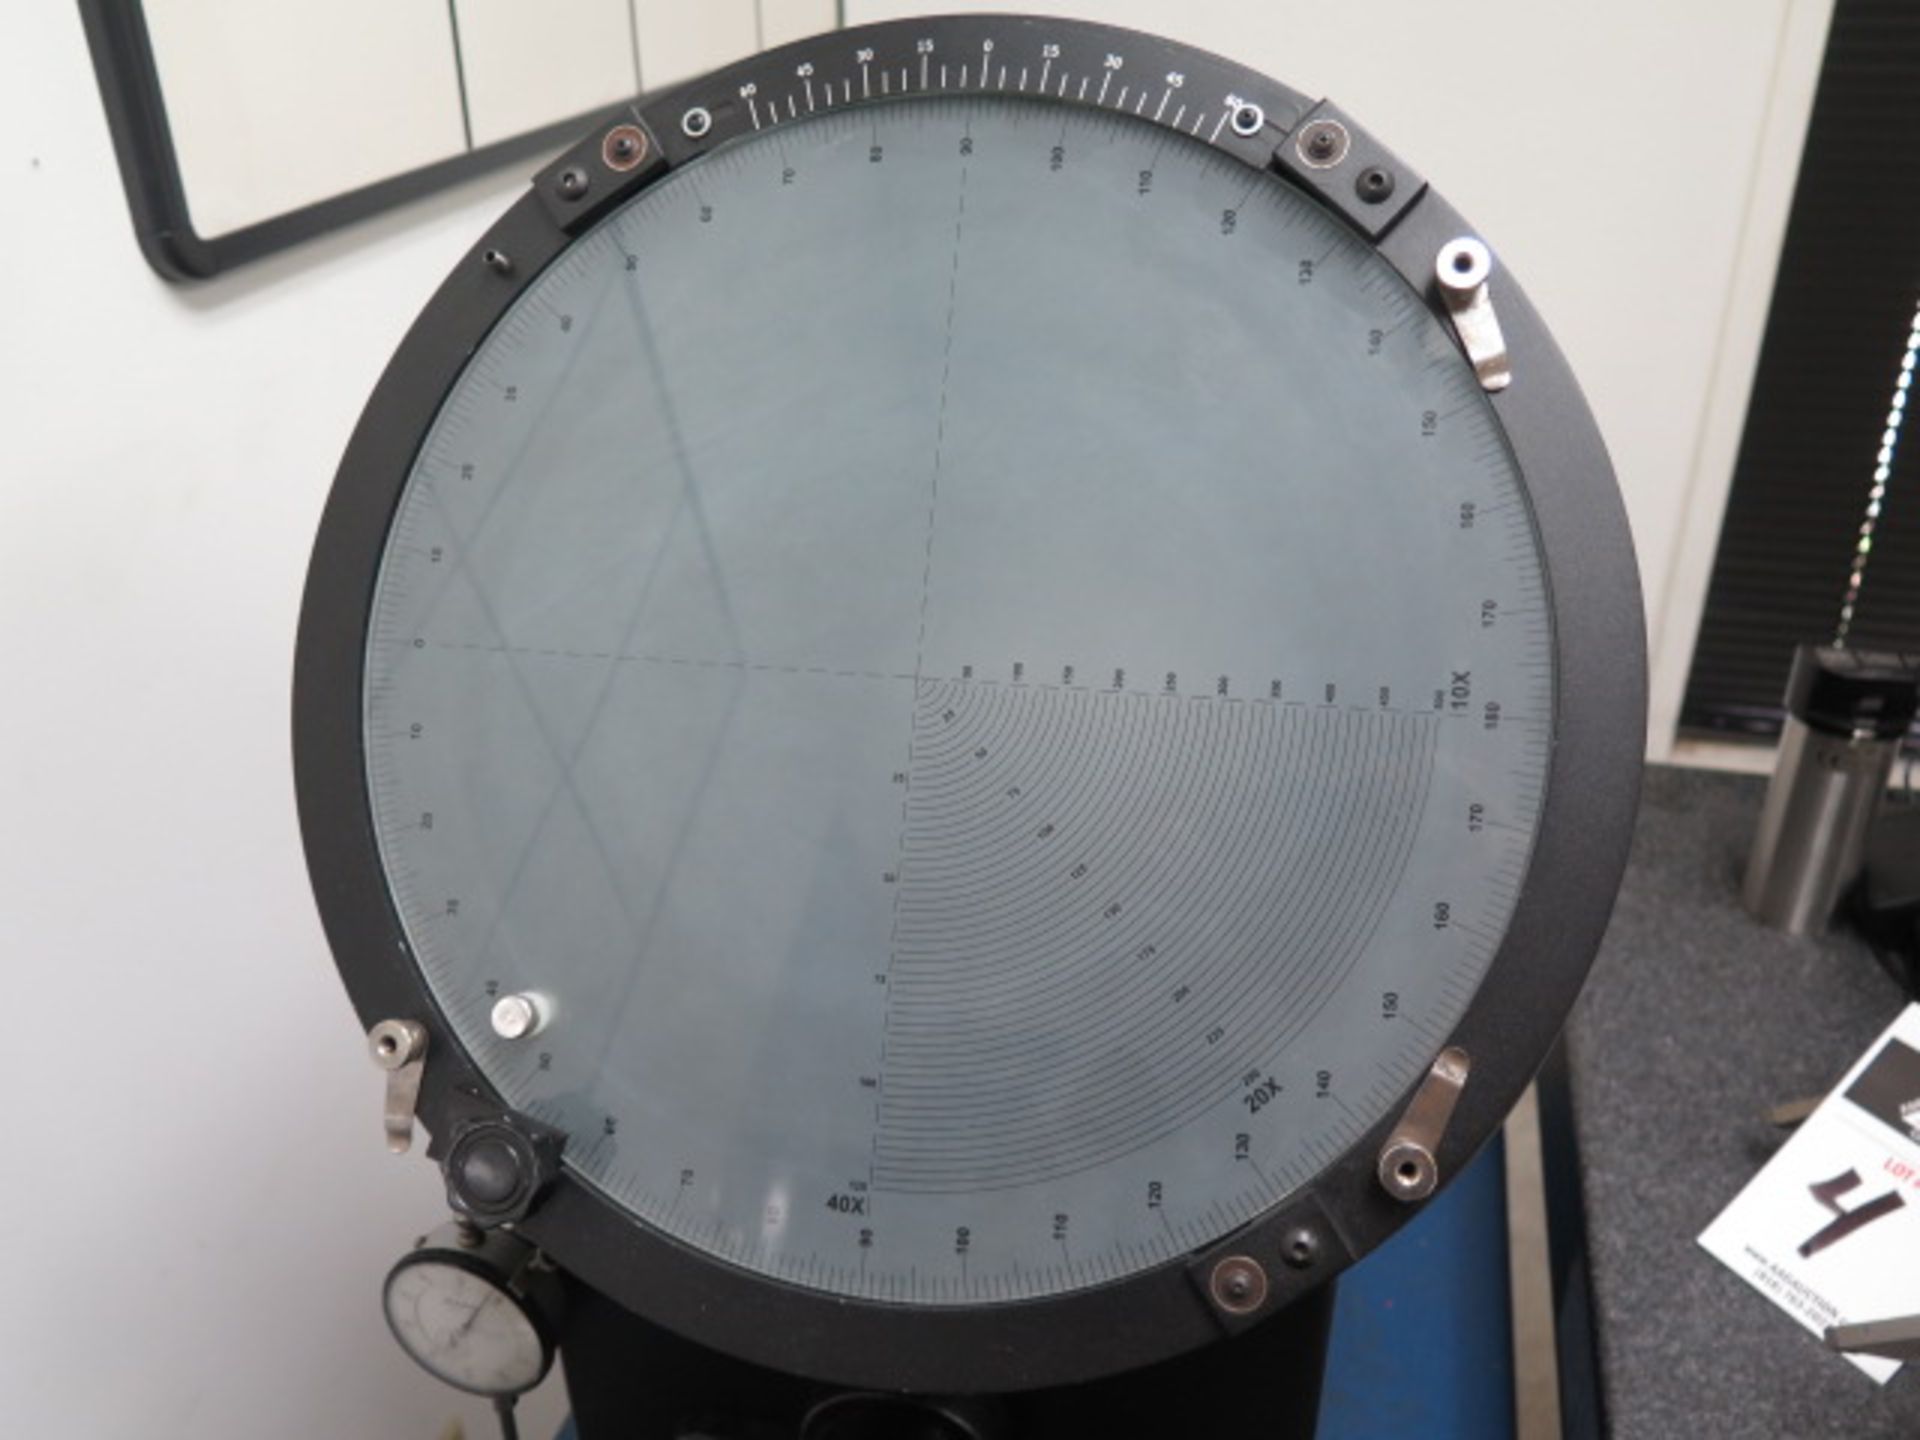 Fowler 12” Table Model Optical Comparator w/ Surface and Profile Illumination, 10X Lens - Image 3 of 7